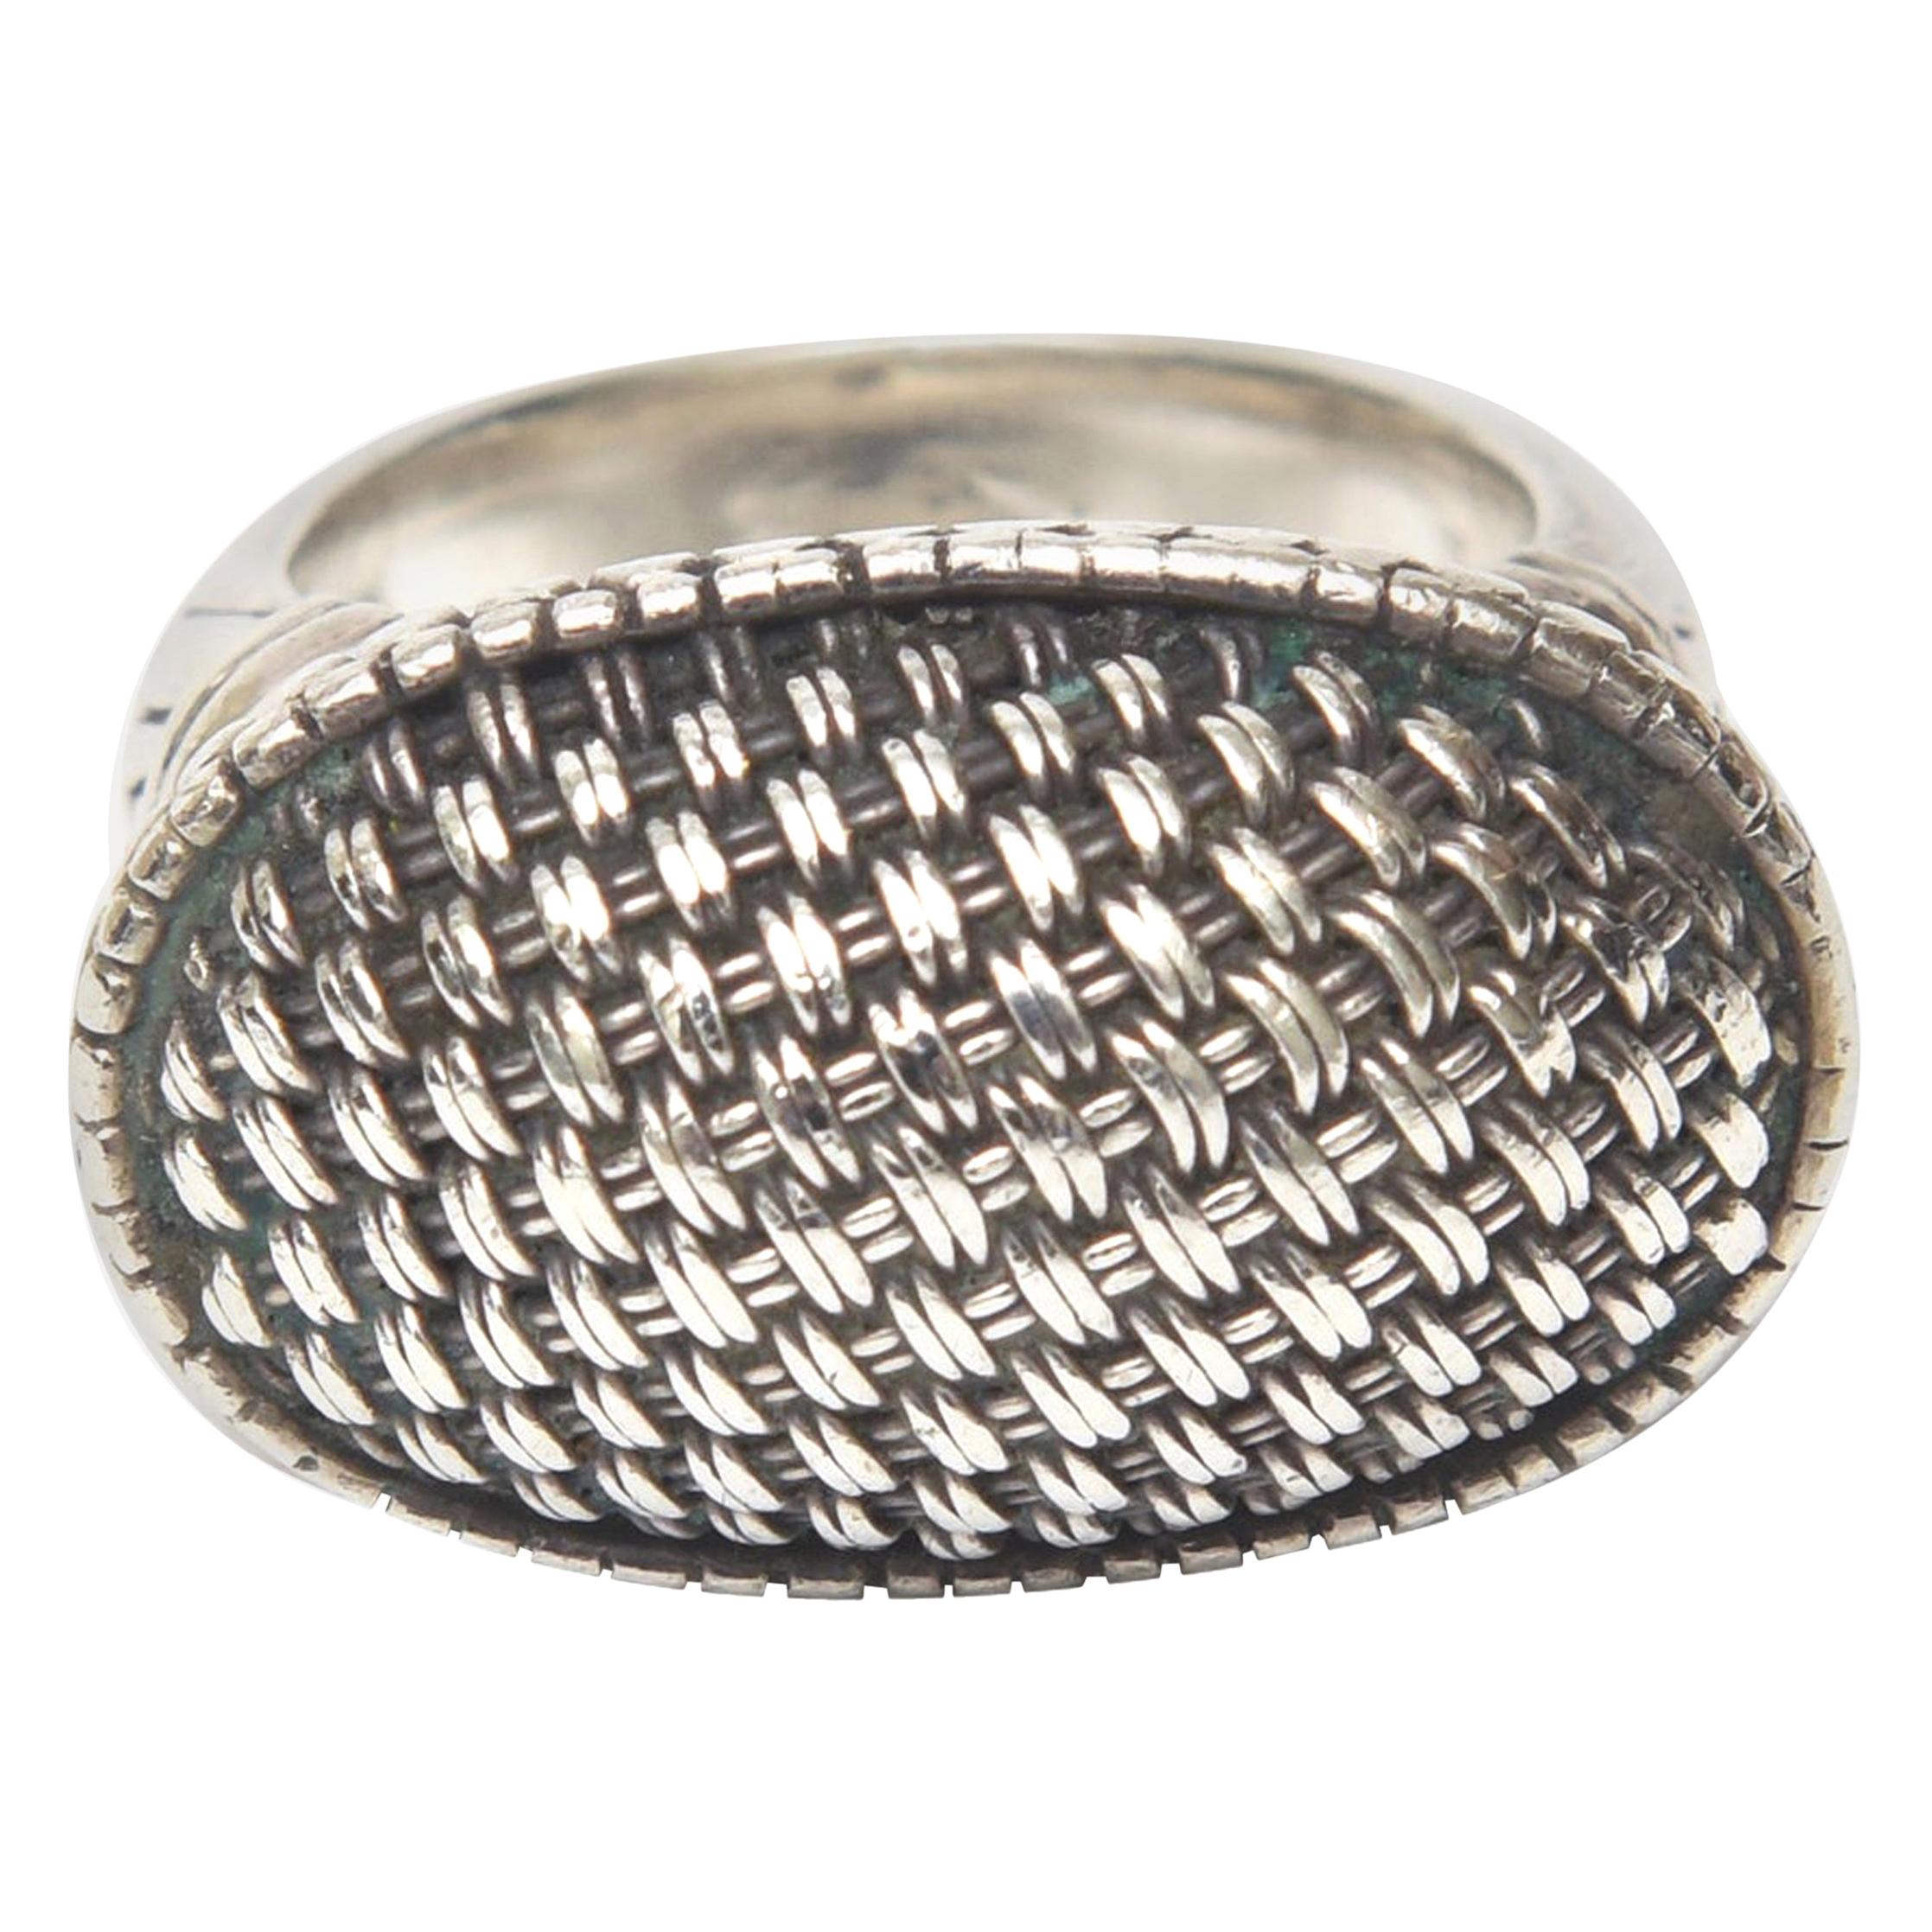 John Hardy Sterling Silver Dome Ring